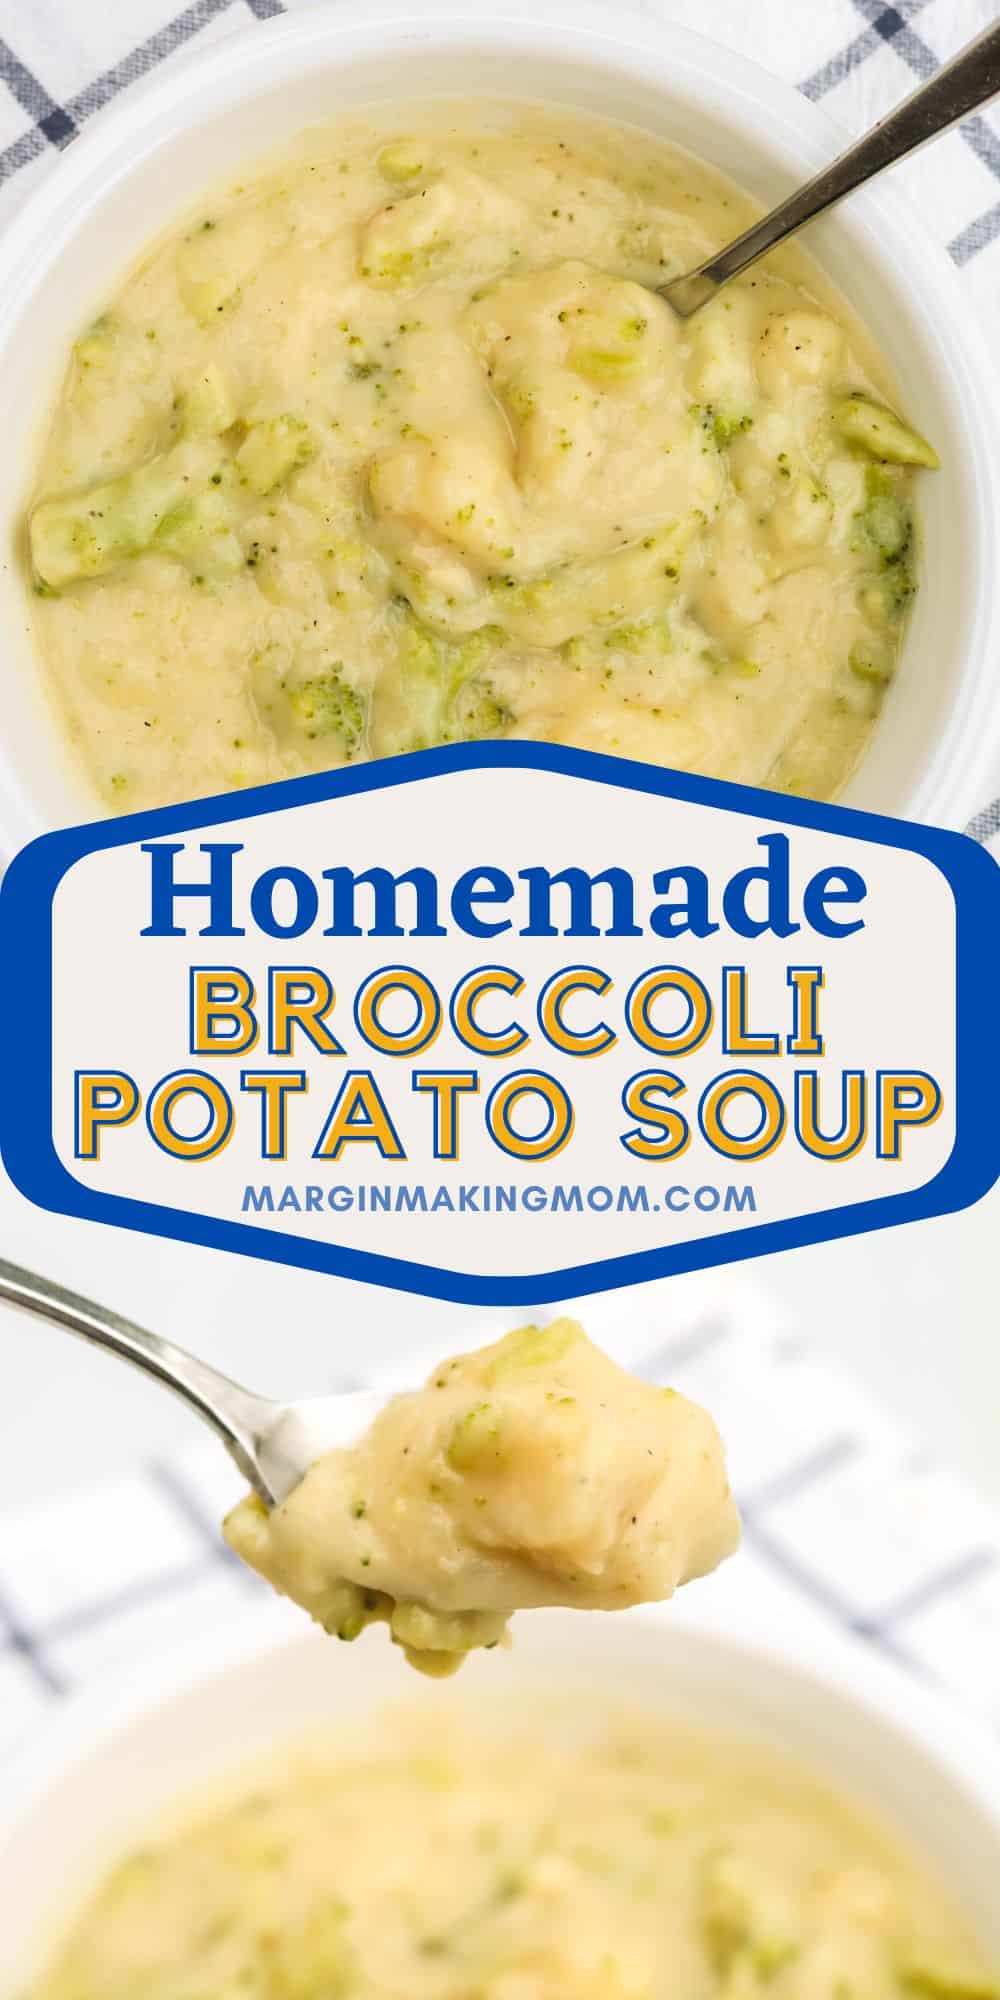 two photos; one shows a bowl of broccoli potato soup with a spoon in it, the other shows the spoon lifting out a bite of the hearty soup.